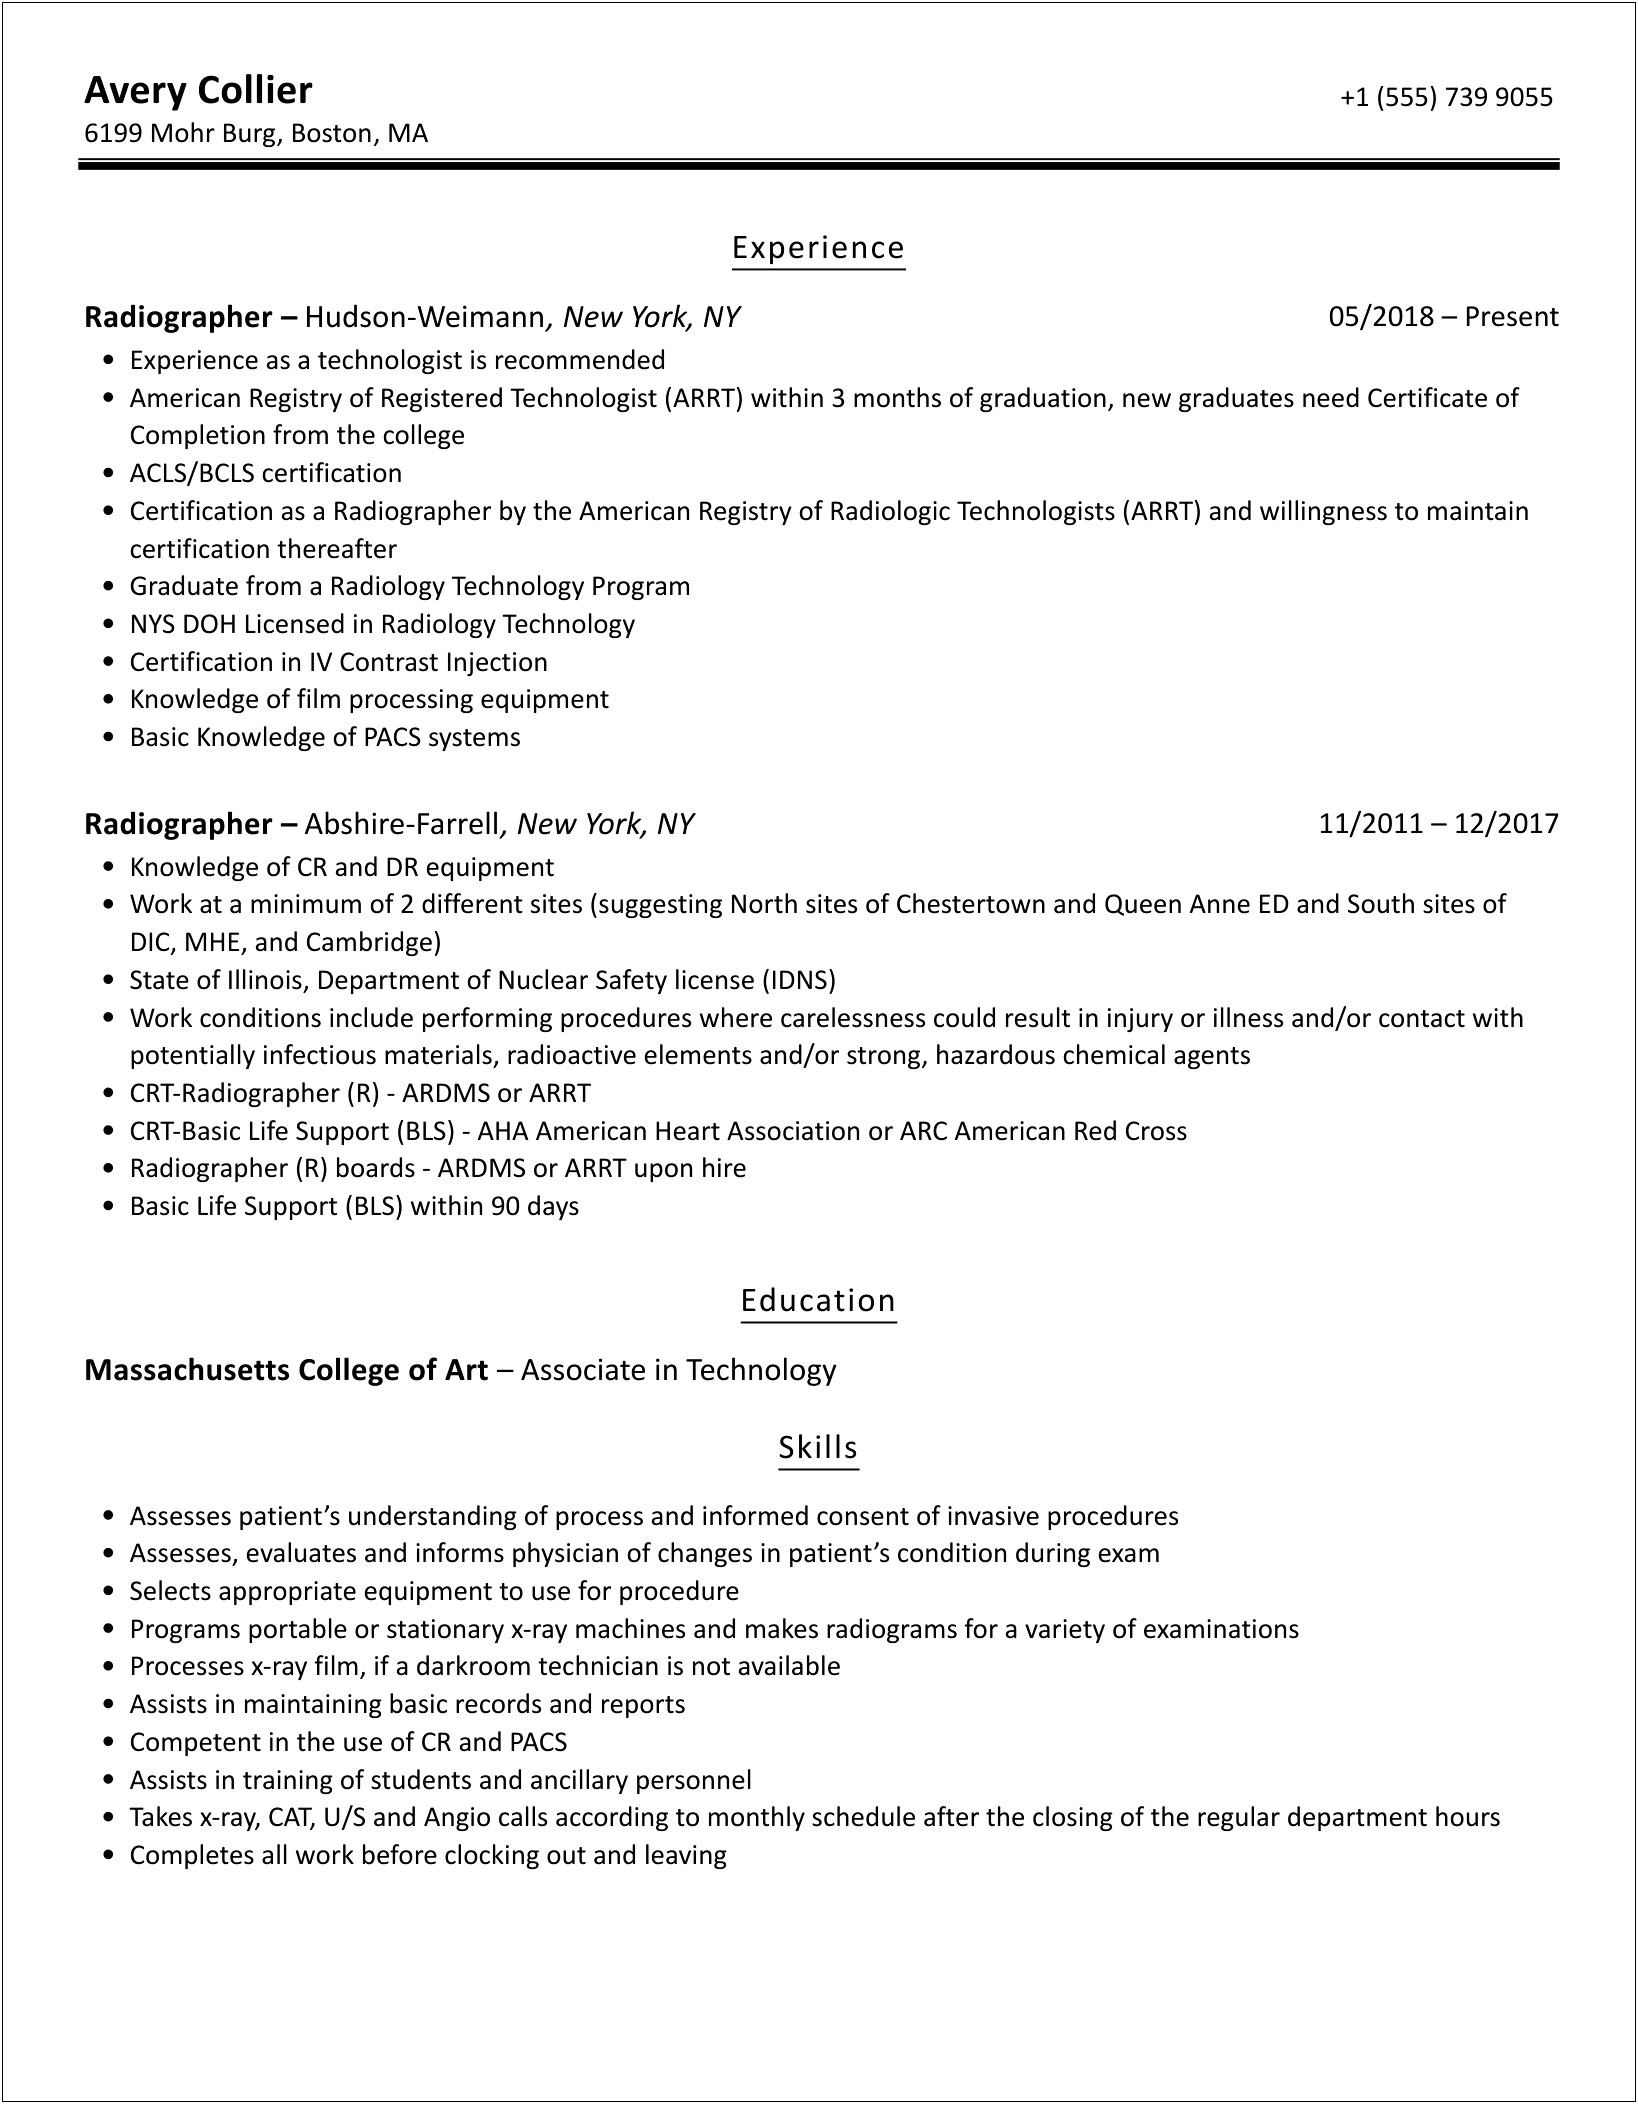 Updating Resume Radiography Internal Position Objective